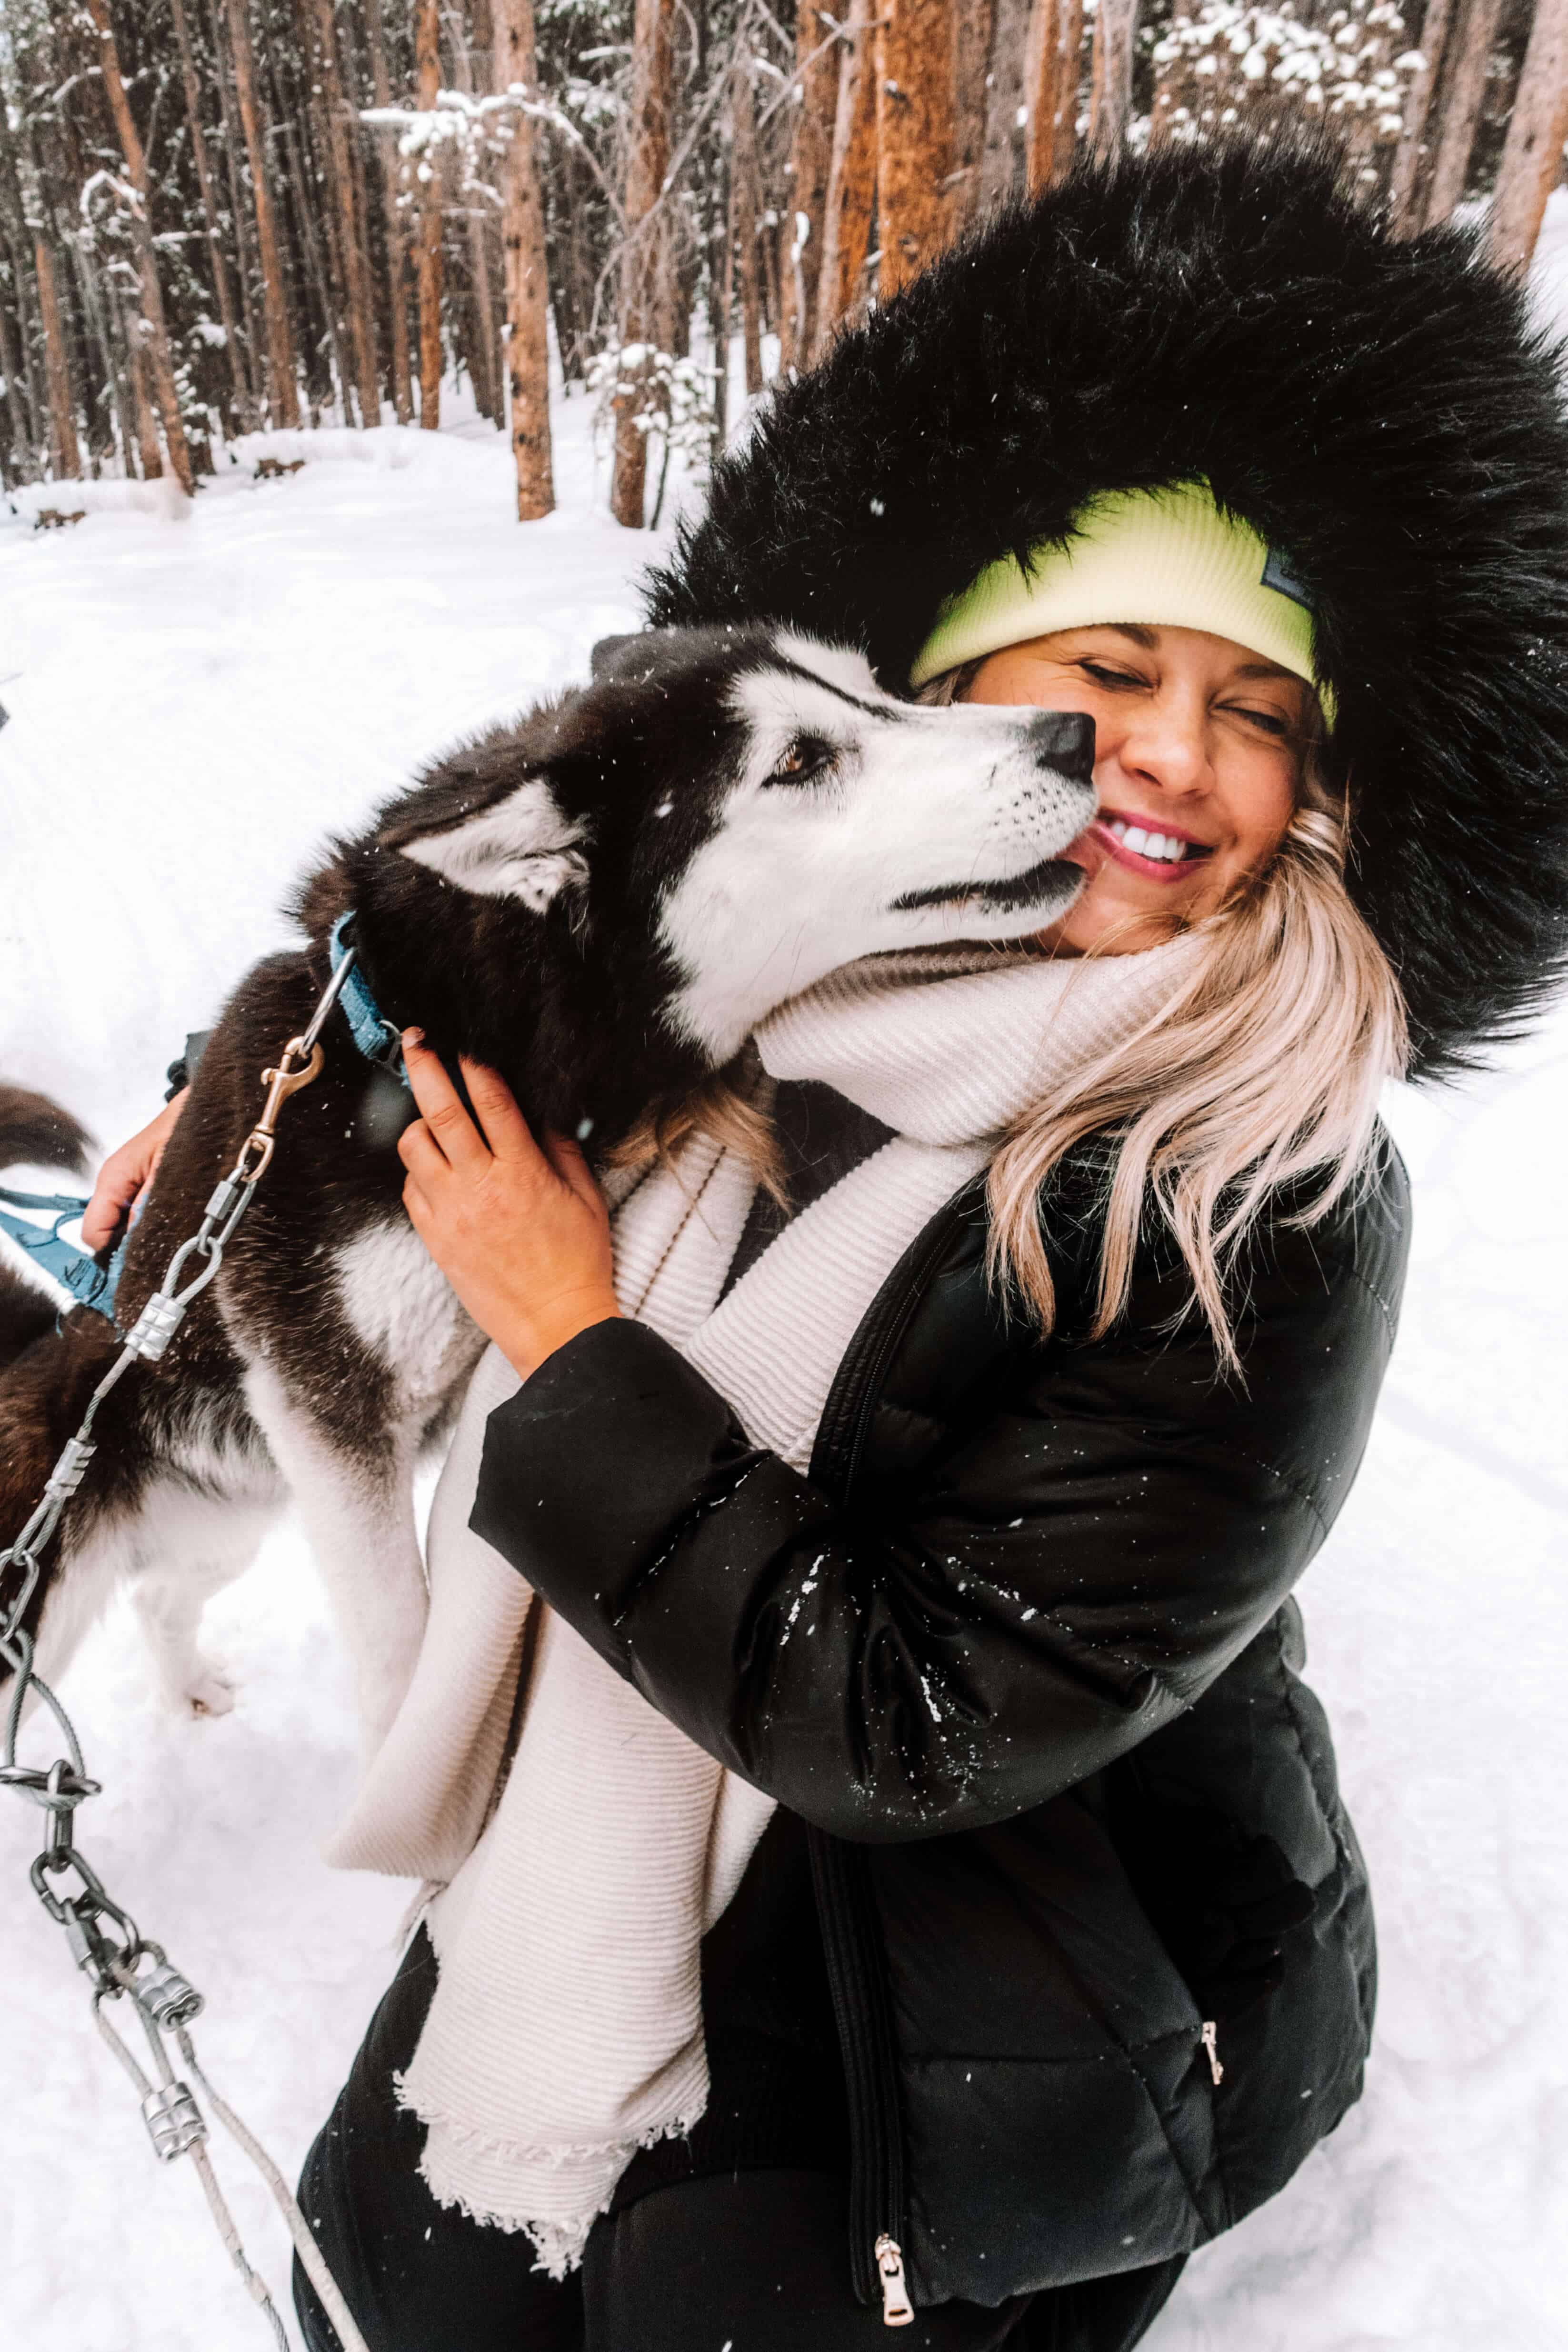 Spending time with the Siberian Huskies while Dog Sledding in Breckenridge, Colorado